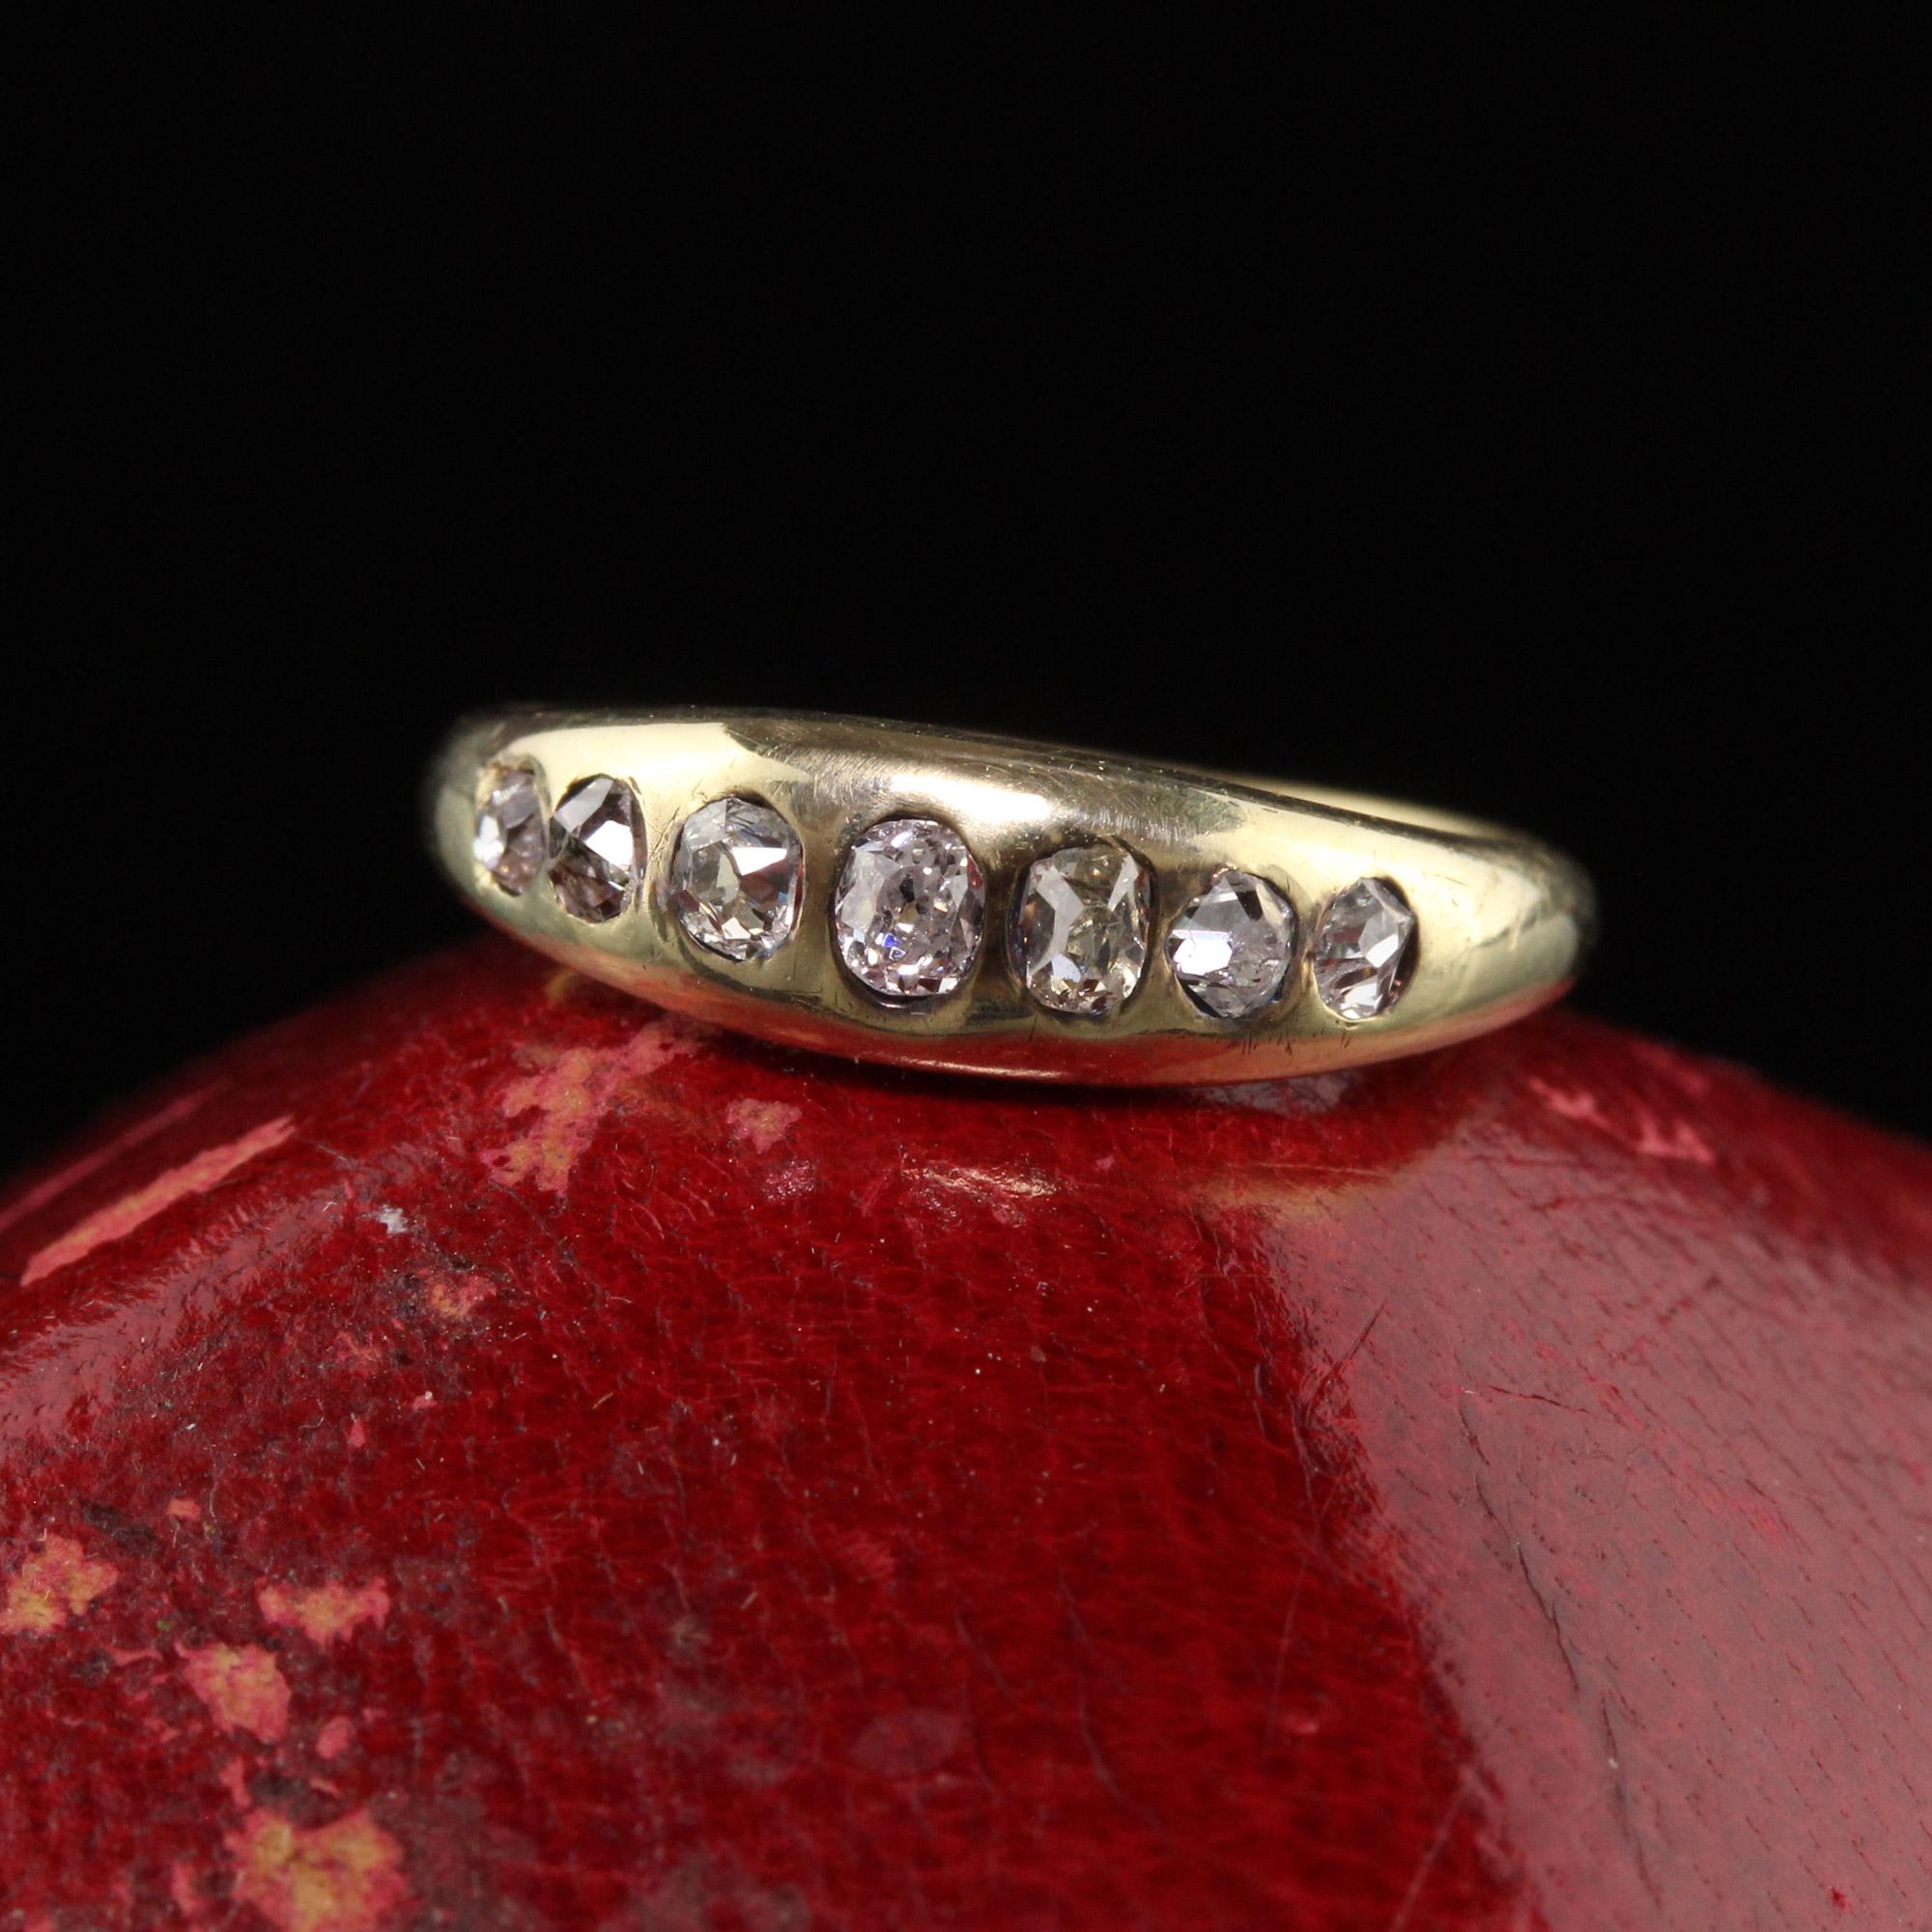 Beautiful Antique Victorian 14K Yellow Gold Old Mine Diamond Gypsy Ring. This incredible ring is crafted in 14k yellow gold. The top has chunky old mine cut diamonds gypsy set into the ring. It is in great condition.

Item #R1365

Metal: 14K Yellow